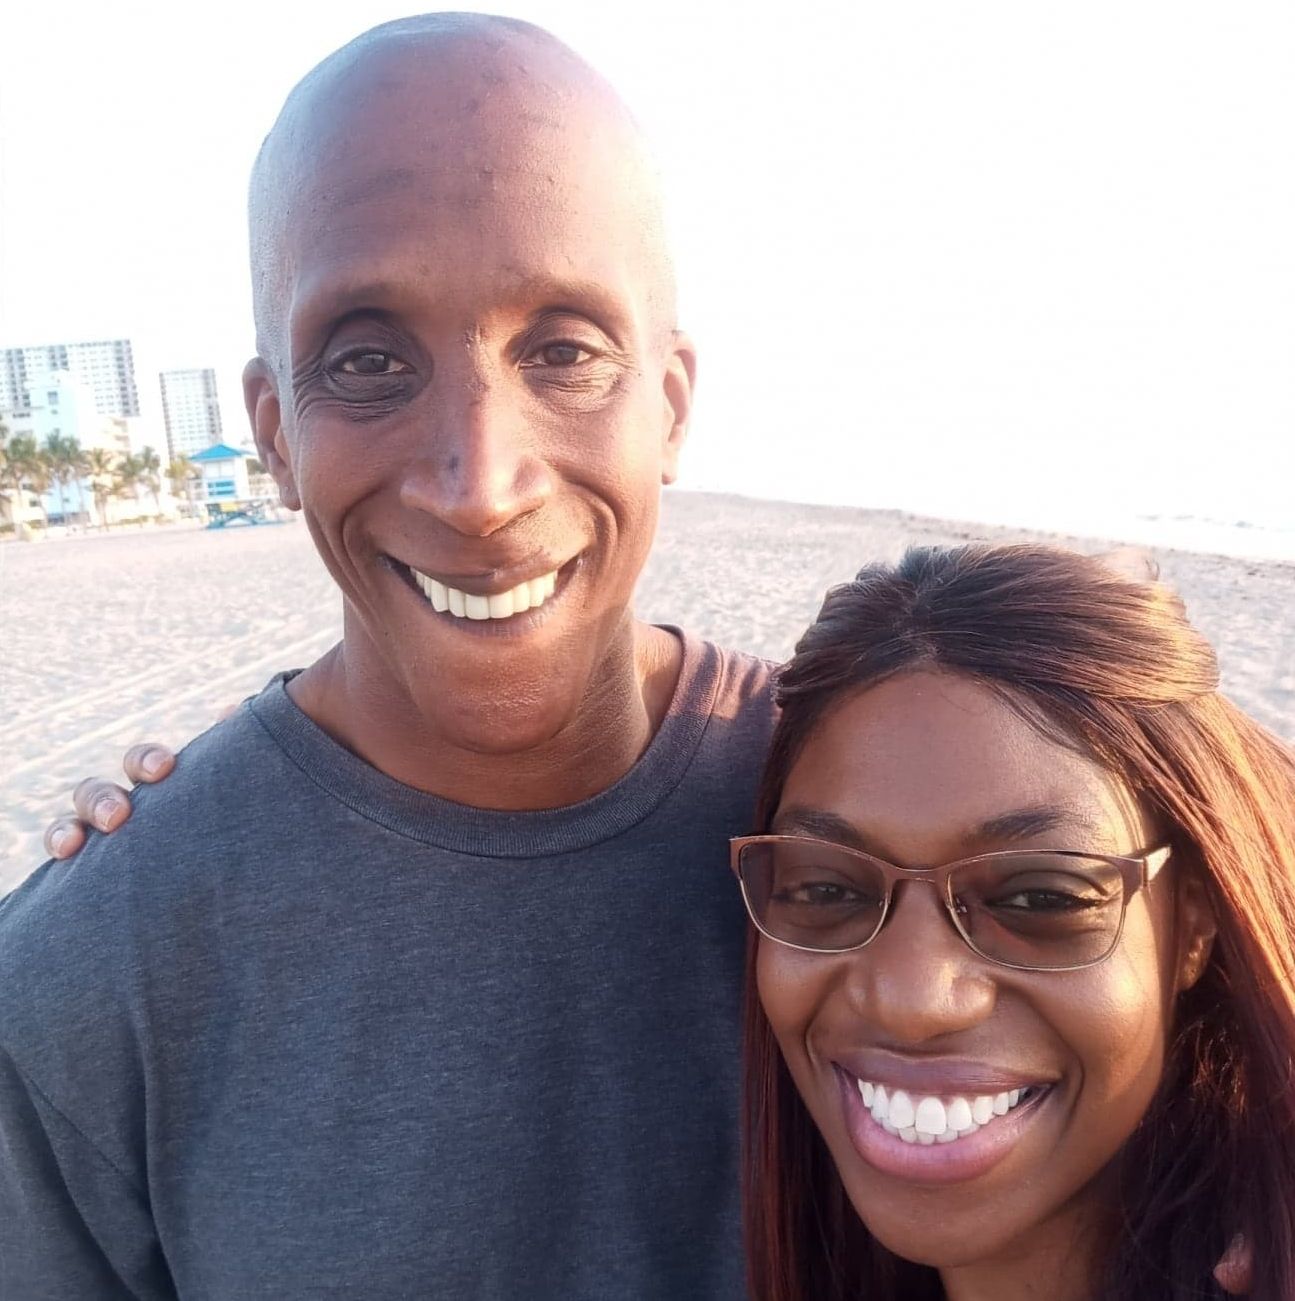 A Christian couple laugh at the beach while posing for a selfie